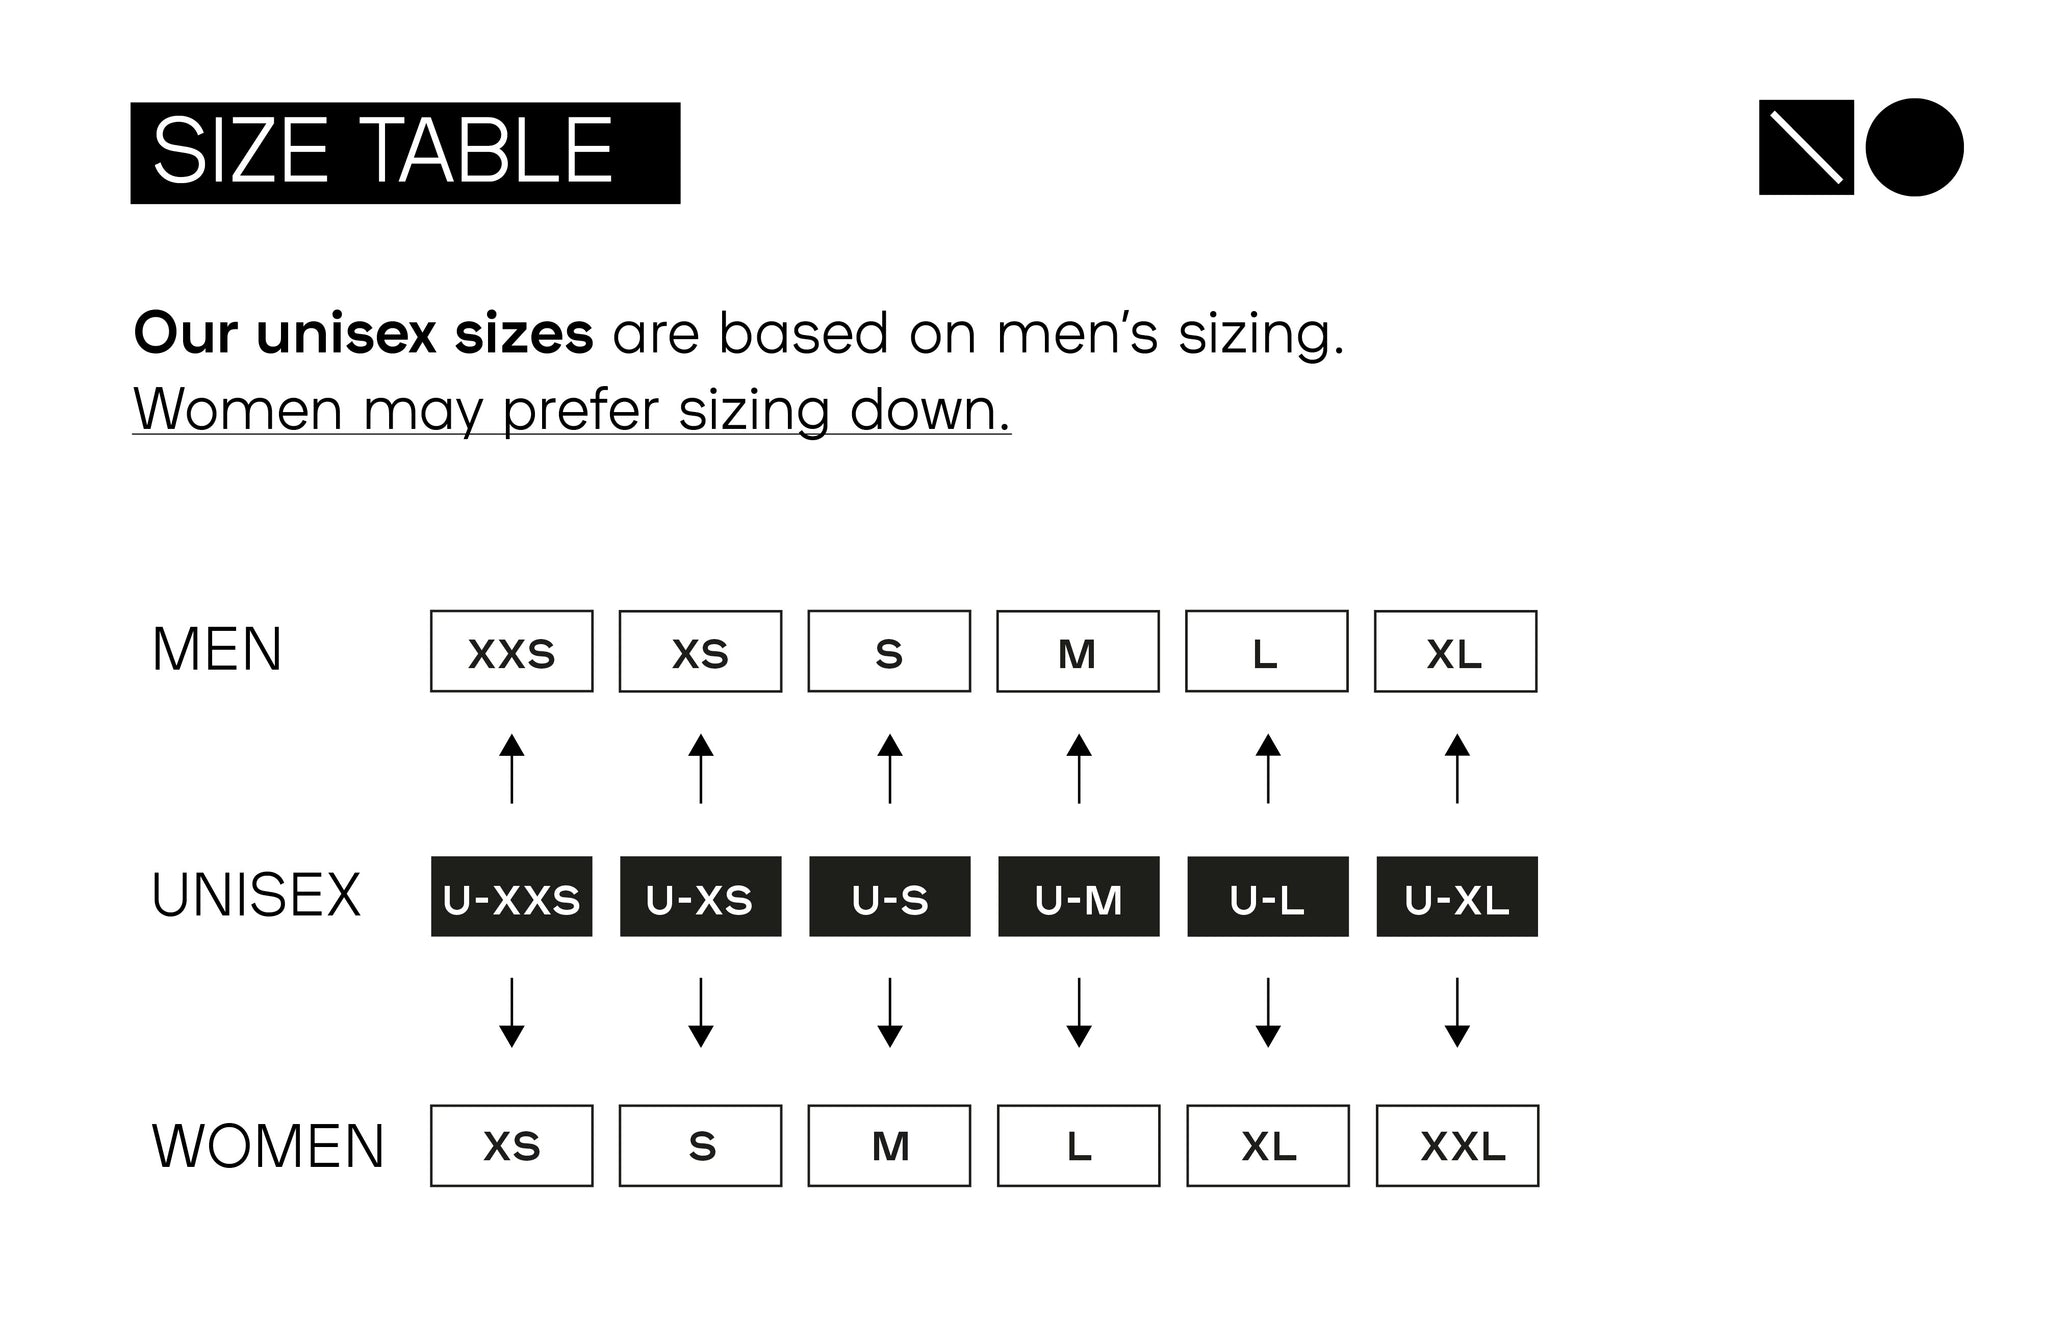 Our unisex sizes are based on men's sizing; women may prefer sizing down. A table showing each "unisex size" and their corresponding "men's" and "women's" sizes. The table: unisex XXS is a men's XXS and a women's XS, unisex XS is a men's XS and a women's S, unisex S is a men's S and a women's M, unisex M is a men's M and a women's L, unisex L is a men's L and a women's XL, unisex XL is a men's XL and a women's XXL.